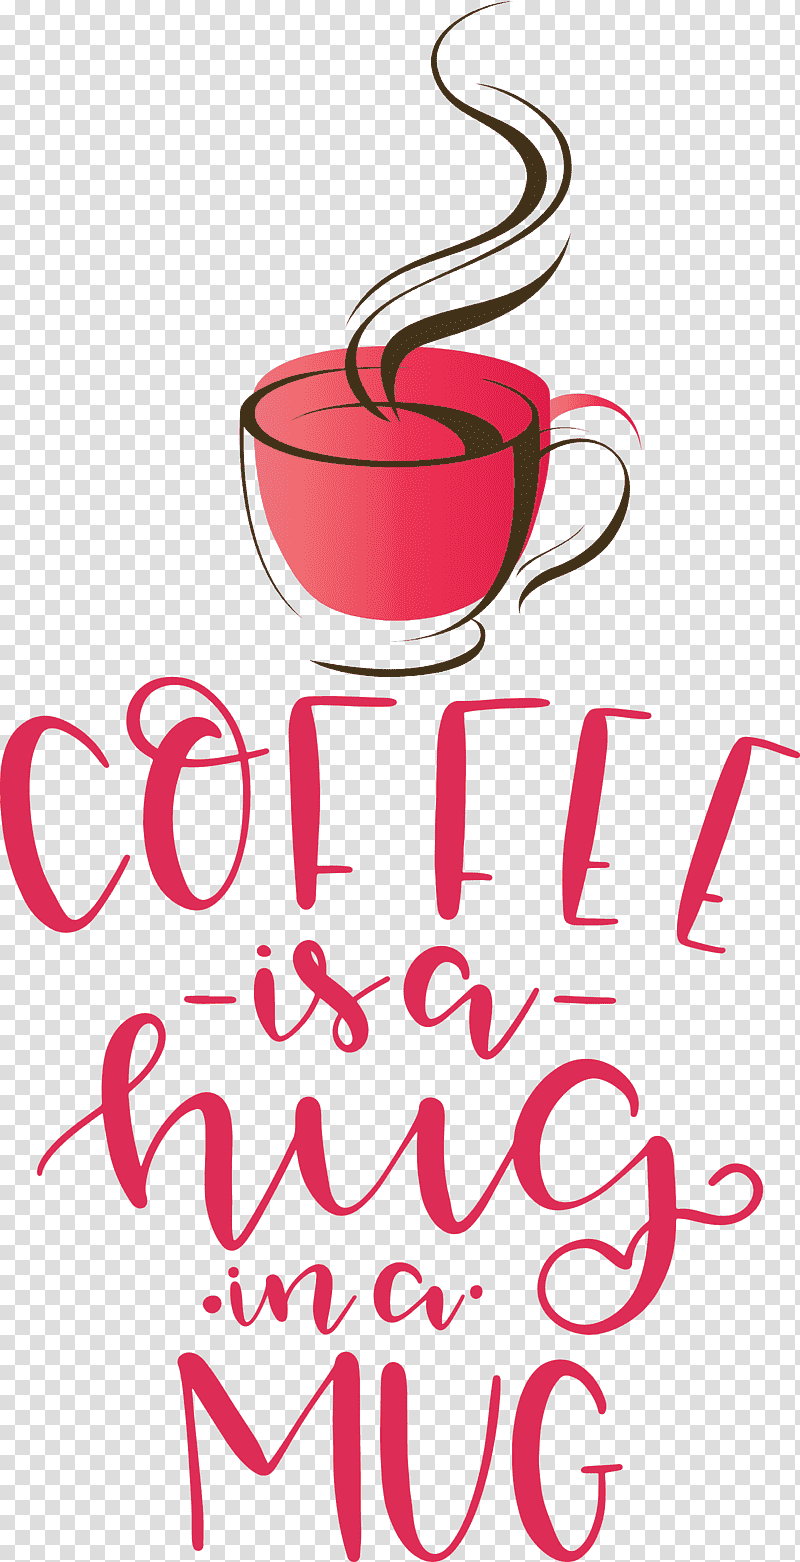 Coffee Coffee Is A Hug In A Mug Coffee quote, Logo, Calligraphy, Line, Meter, Coffee Service, Geometry transparent background PNG clipart